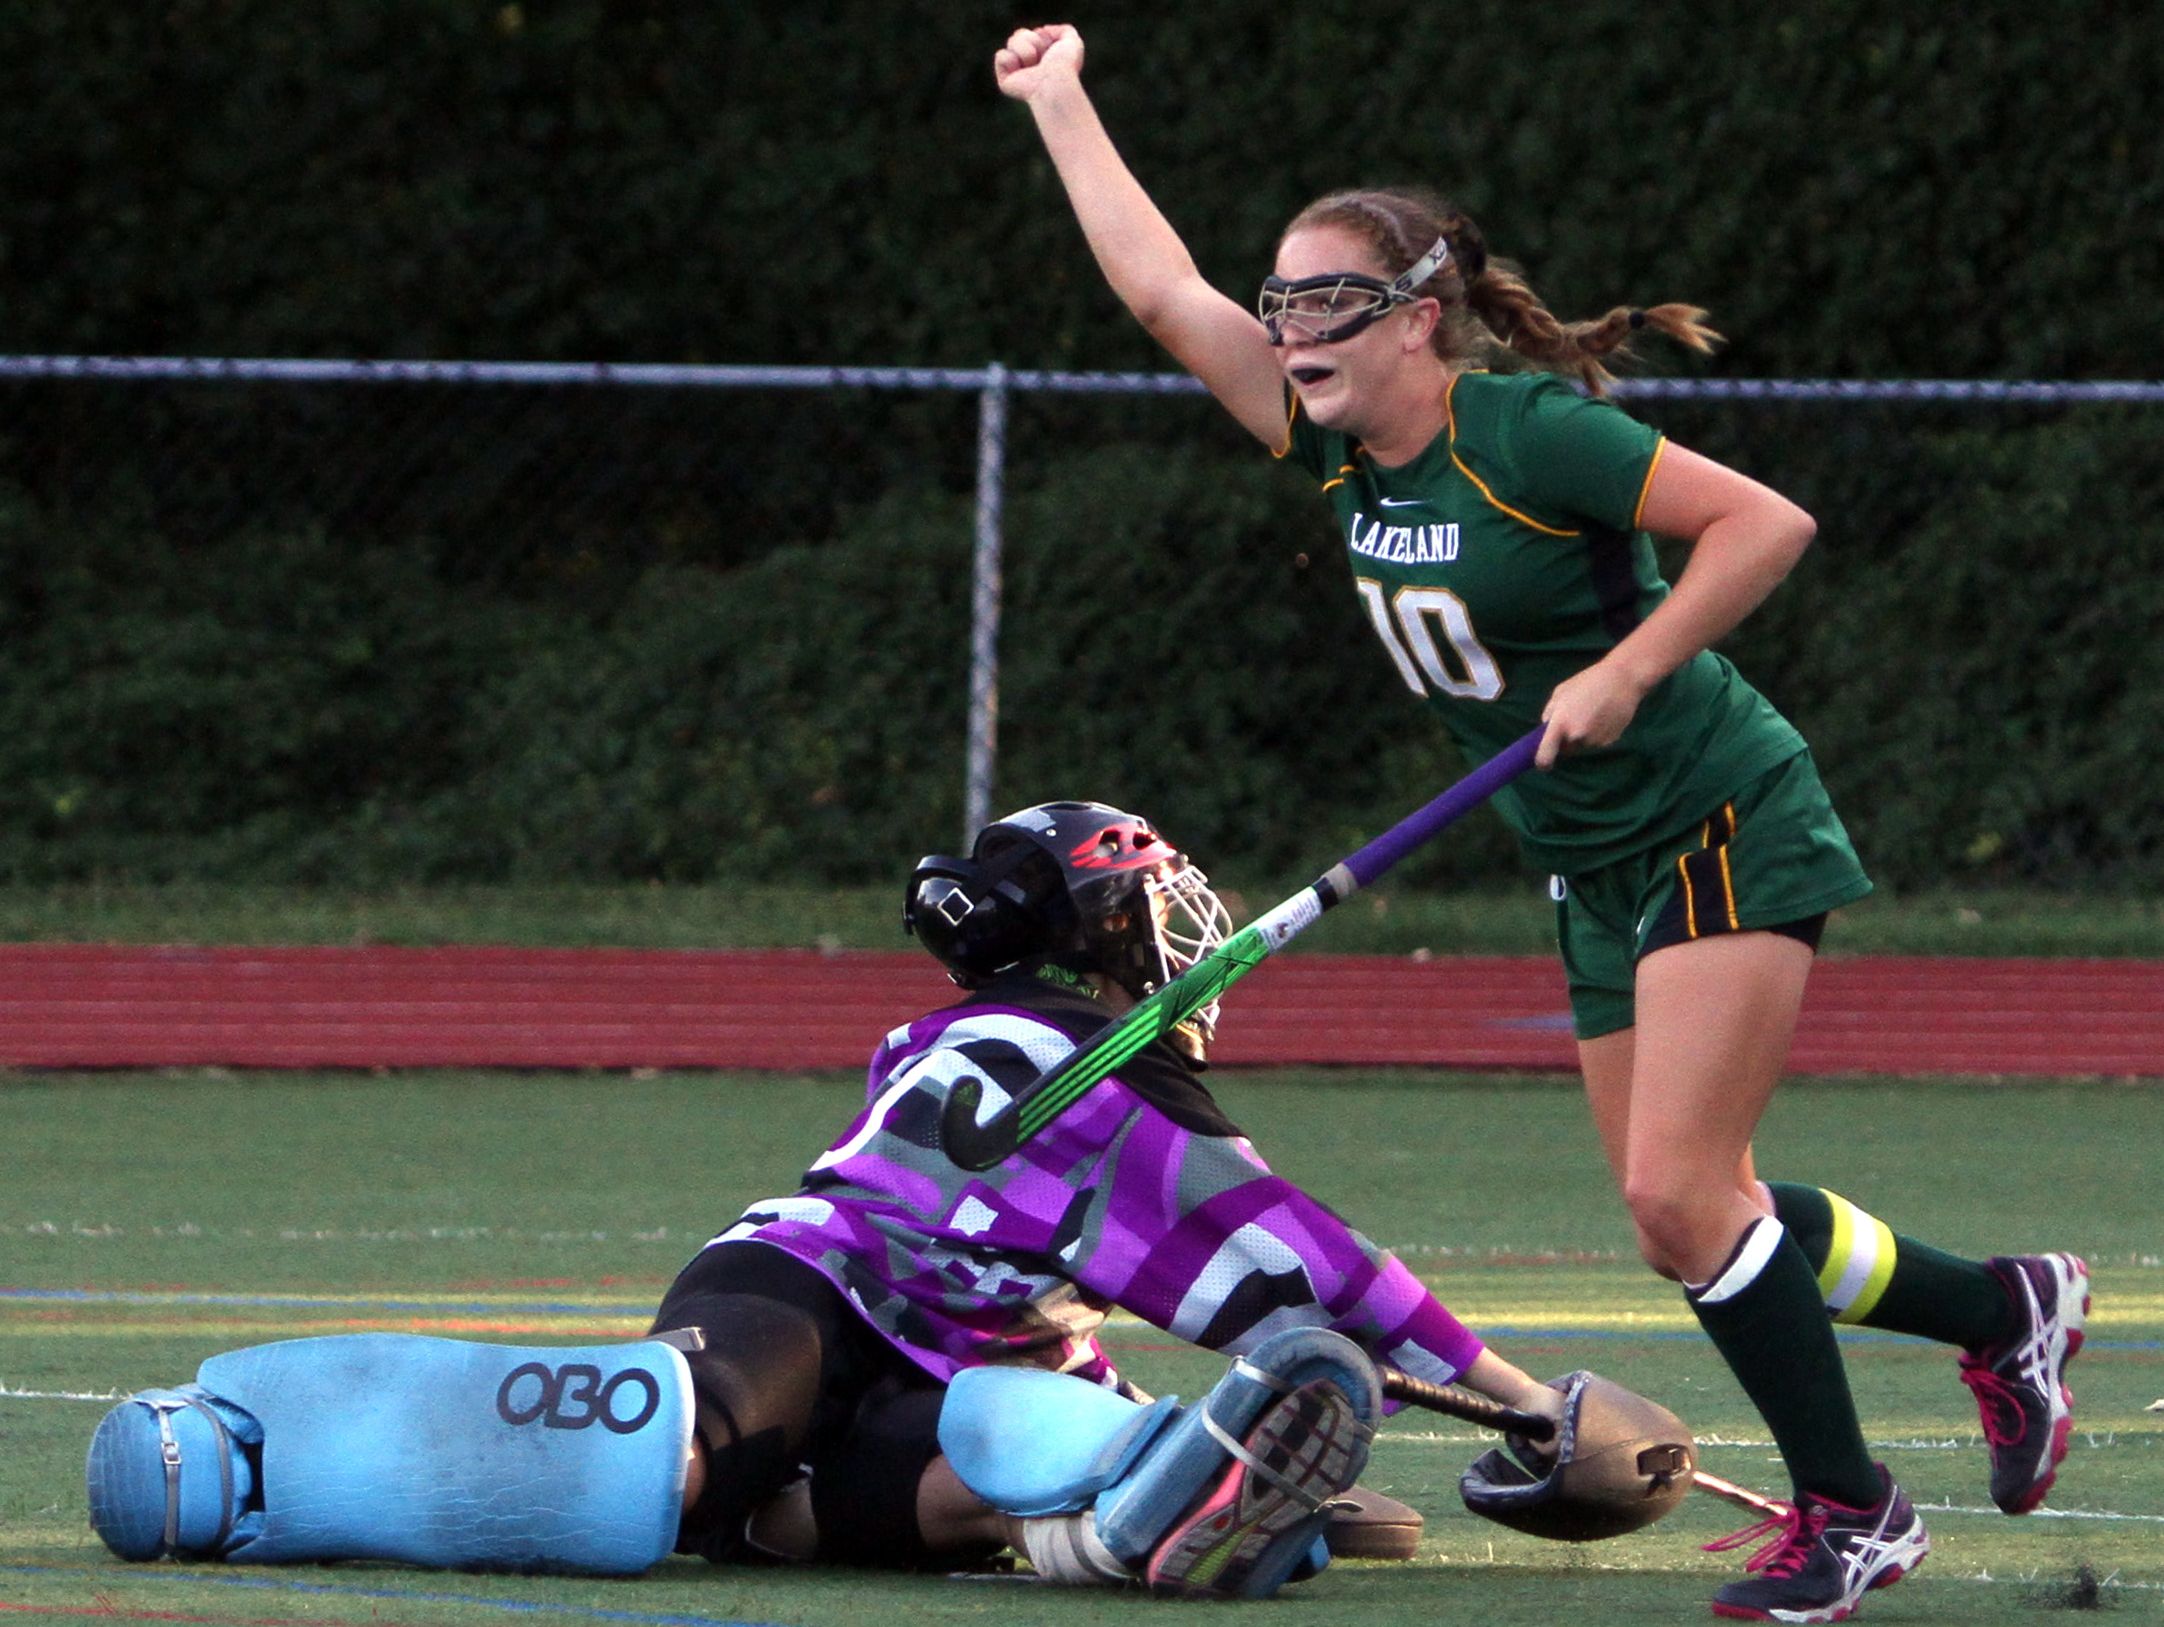 Lakeland's Meghan Fahey celebrates after beating Rye goalie Maggie Devlin for Lakeland's third goal during a game at Rye High School on Sept. 15. The Hornets defeated Rye 3-1.